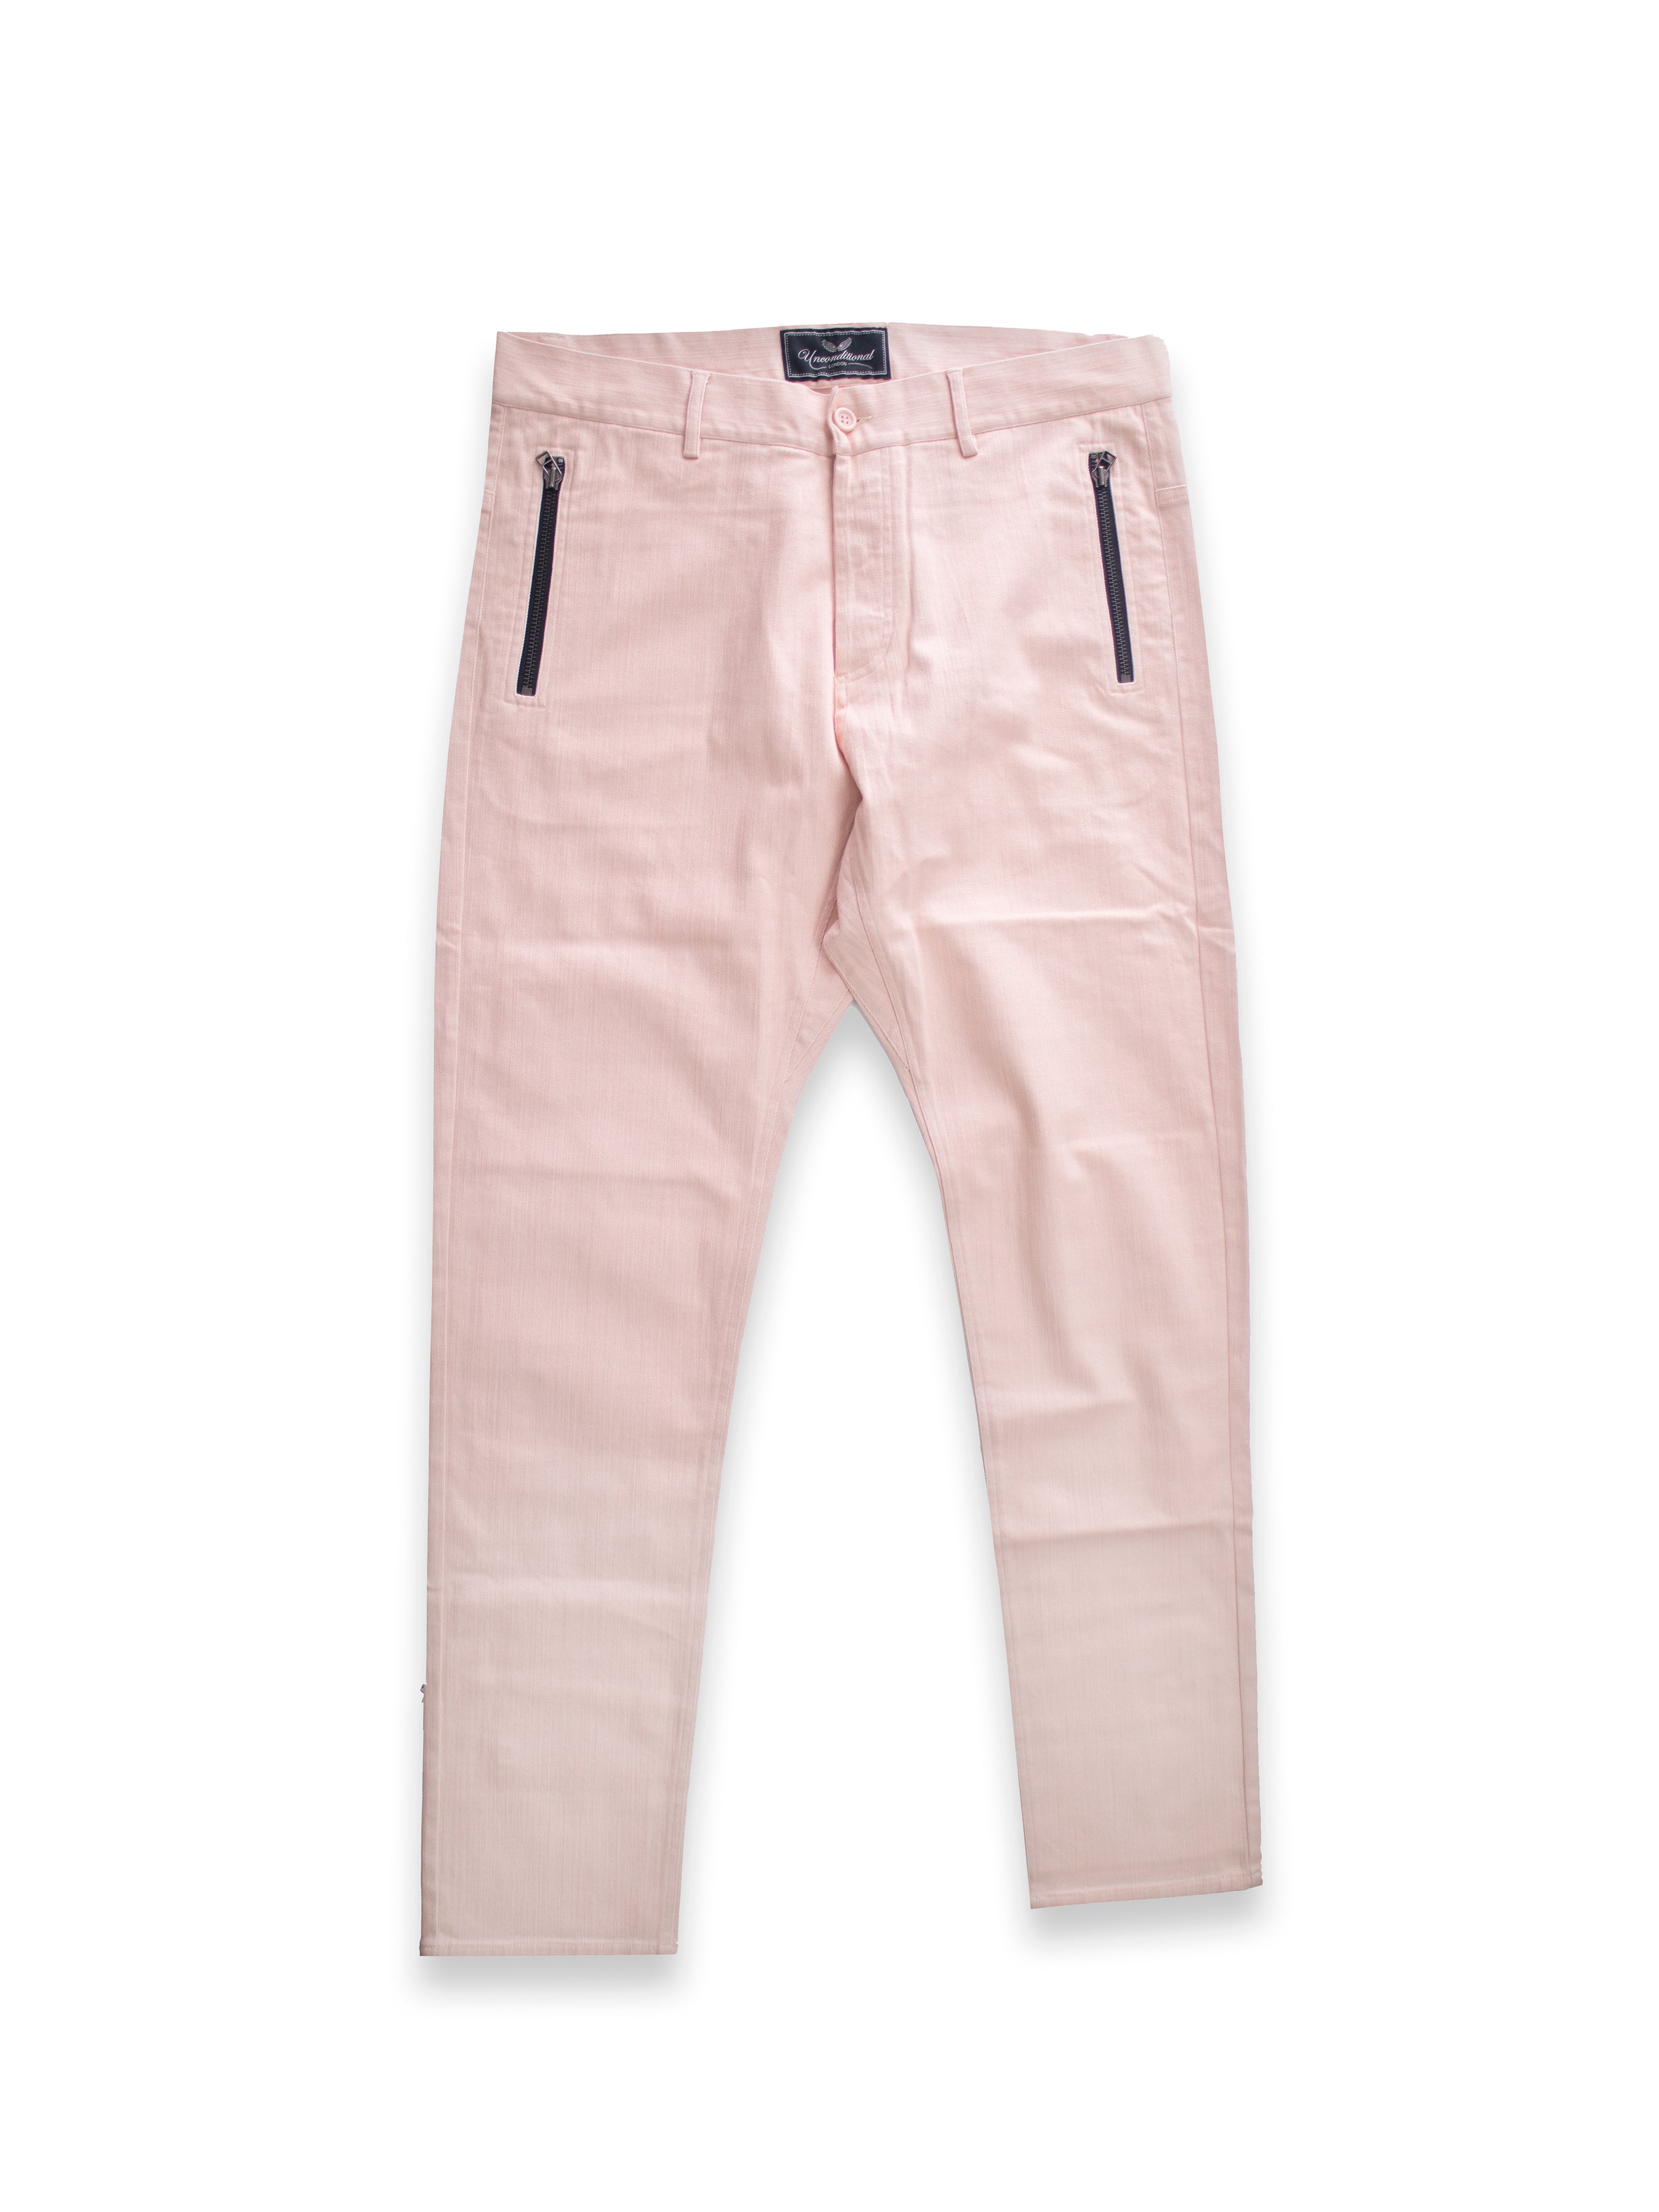 Light Pink Jeans with Black Pocket Zips